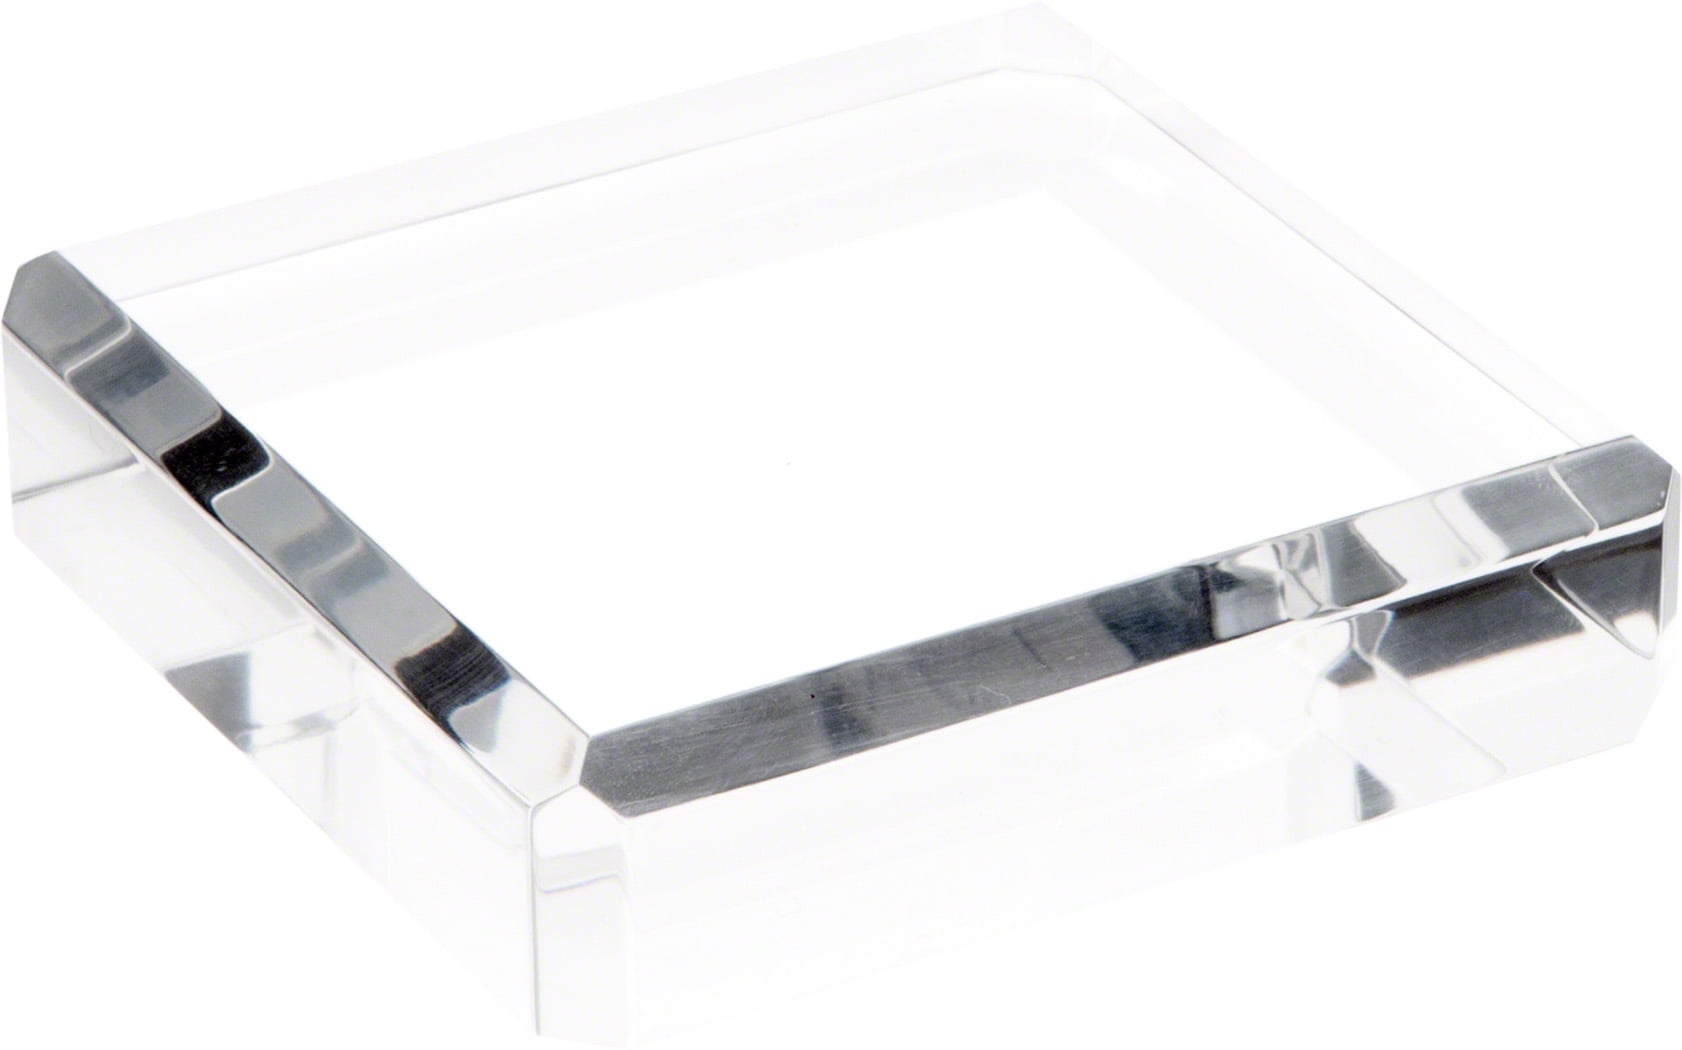 1 H x 2 W x 2 D Plymor Brand Clear Polished Acrylic Square Display Block 